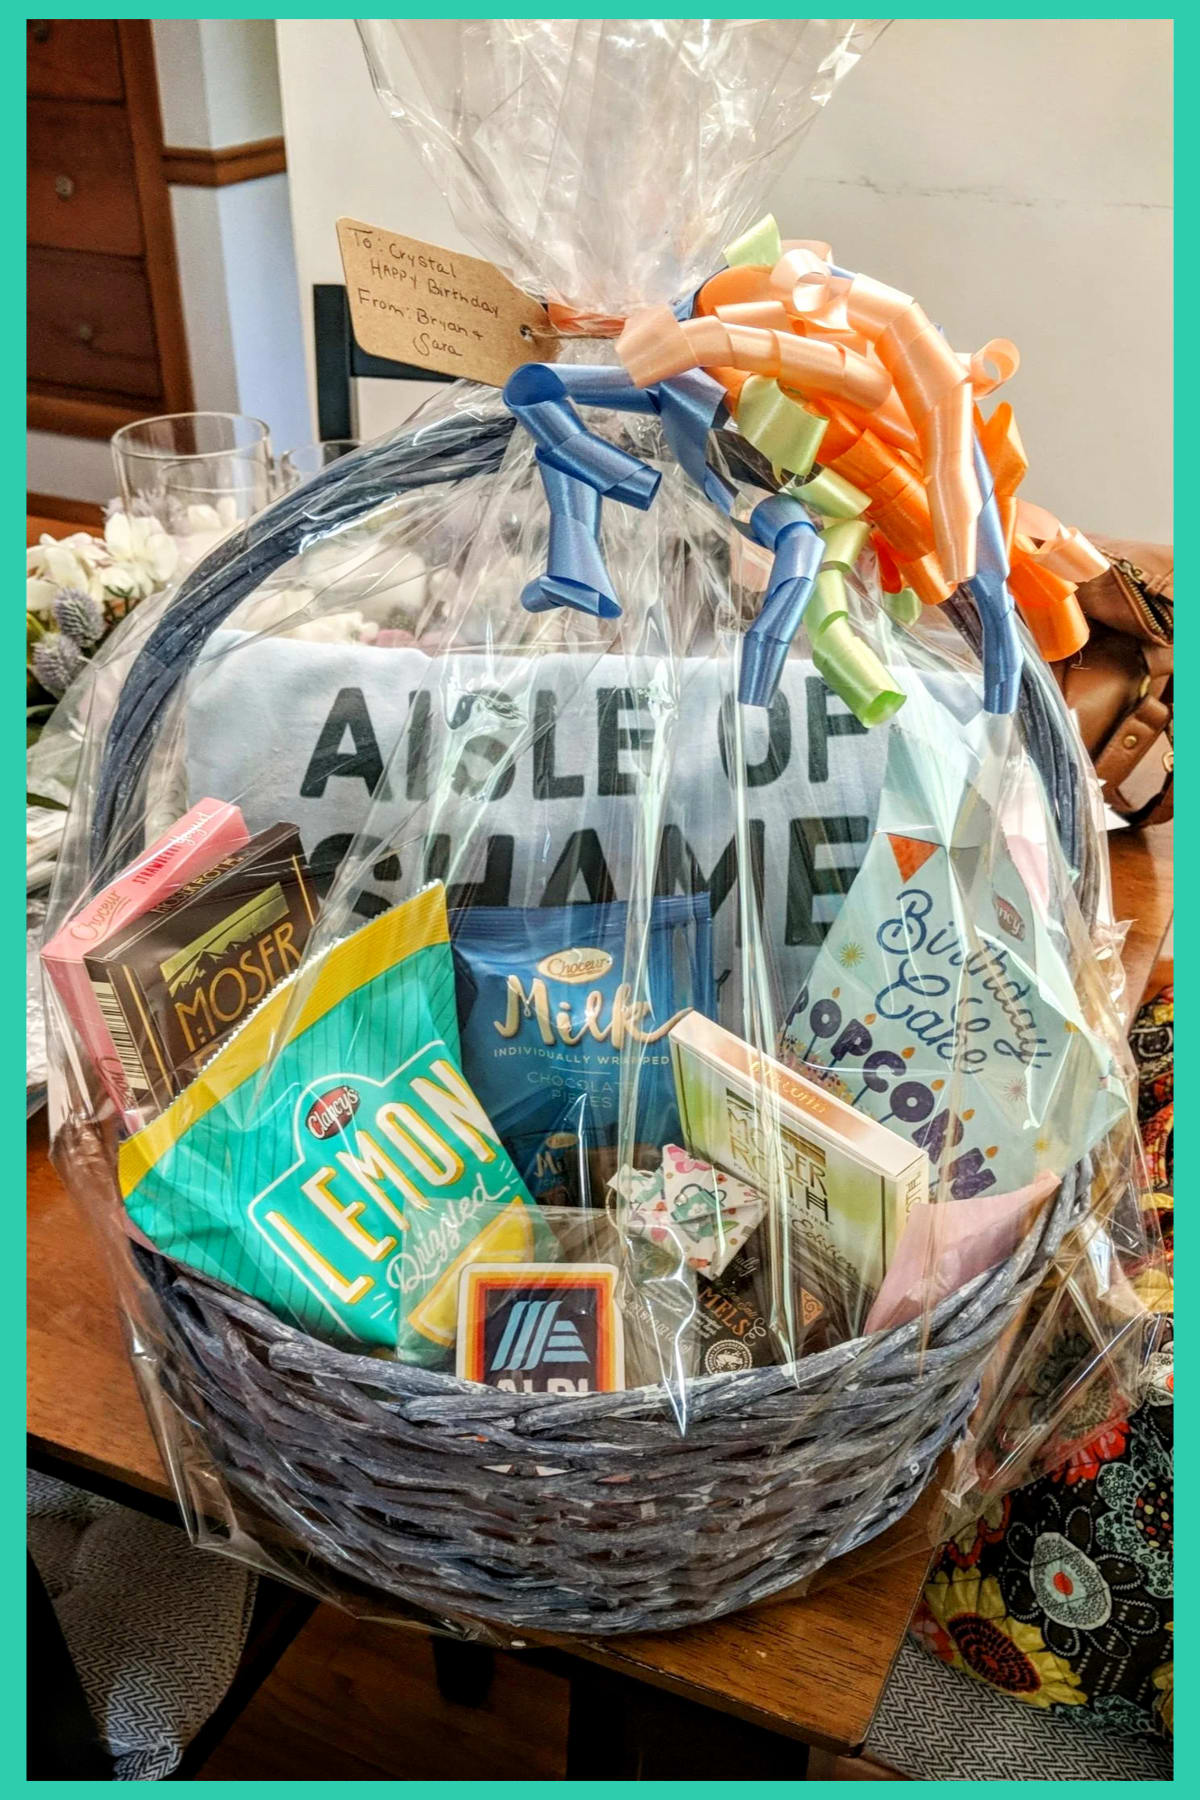 Homemade gift baskets - creative DIY gift basket ideas for the one who LOVES shopping at Aldi